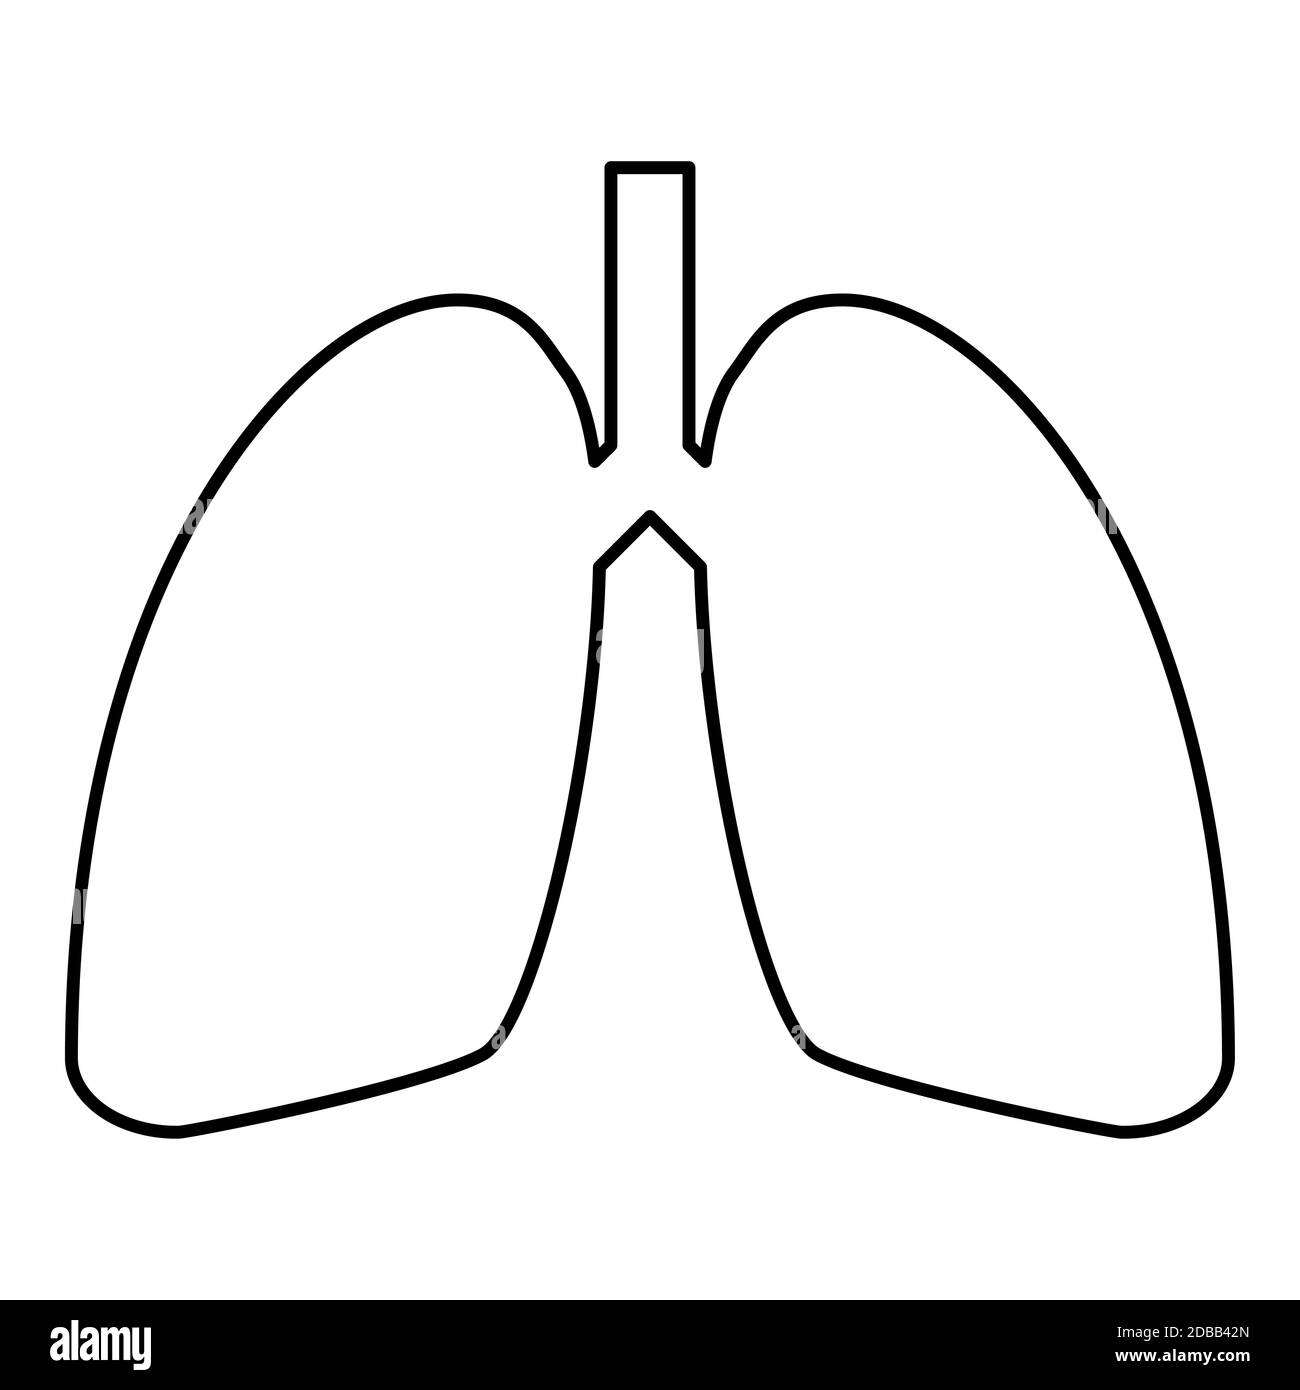 Lungs human icon outline black color vector illustration flat style simple image Stock Photo